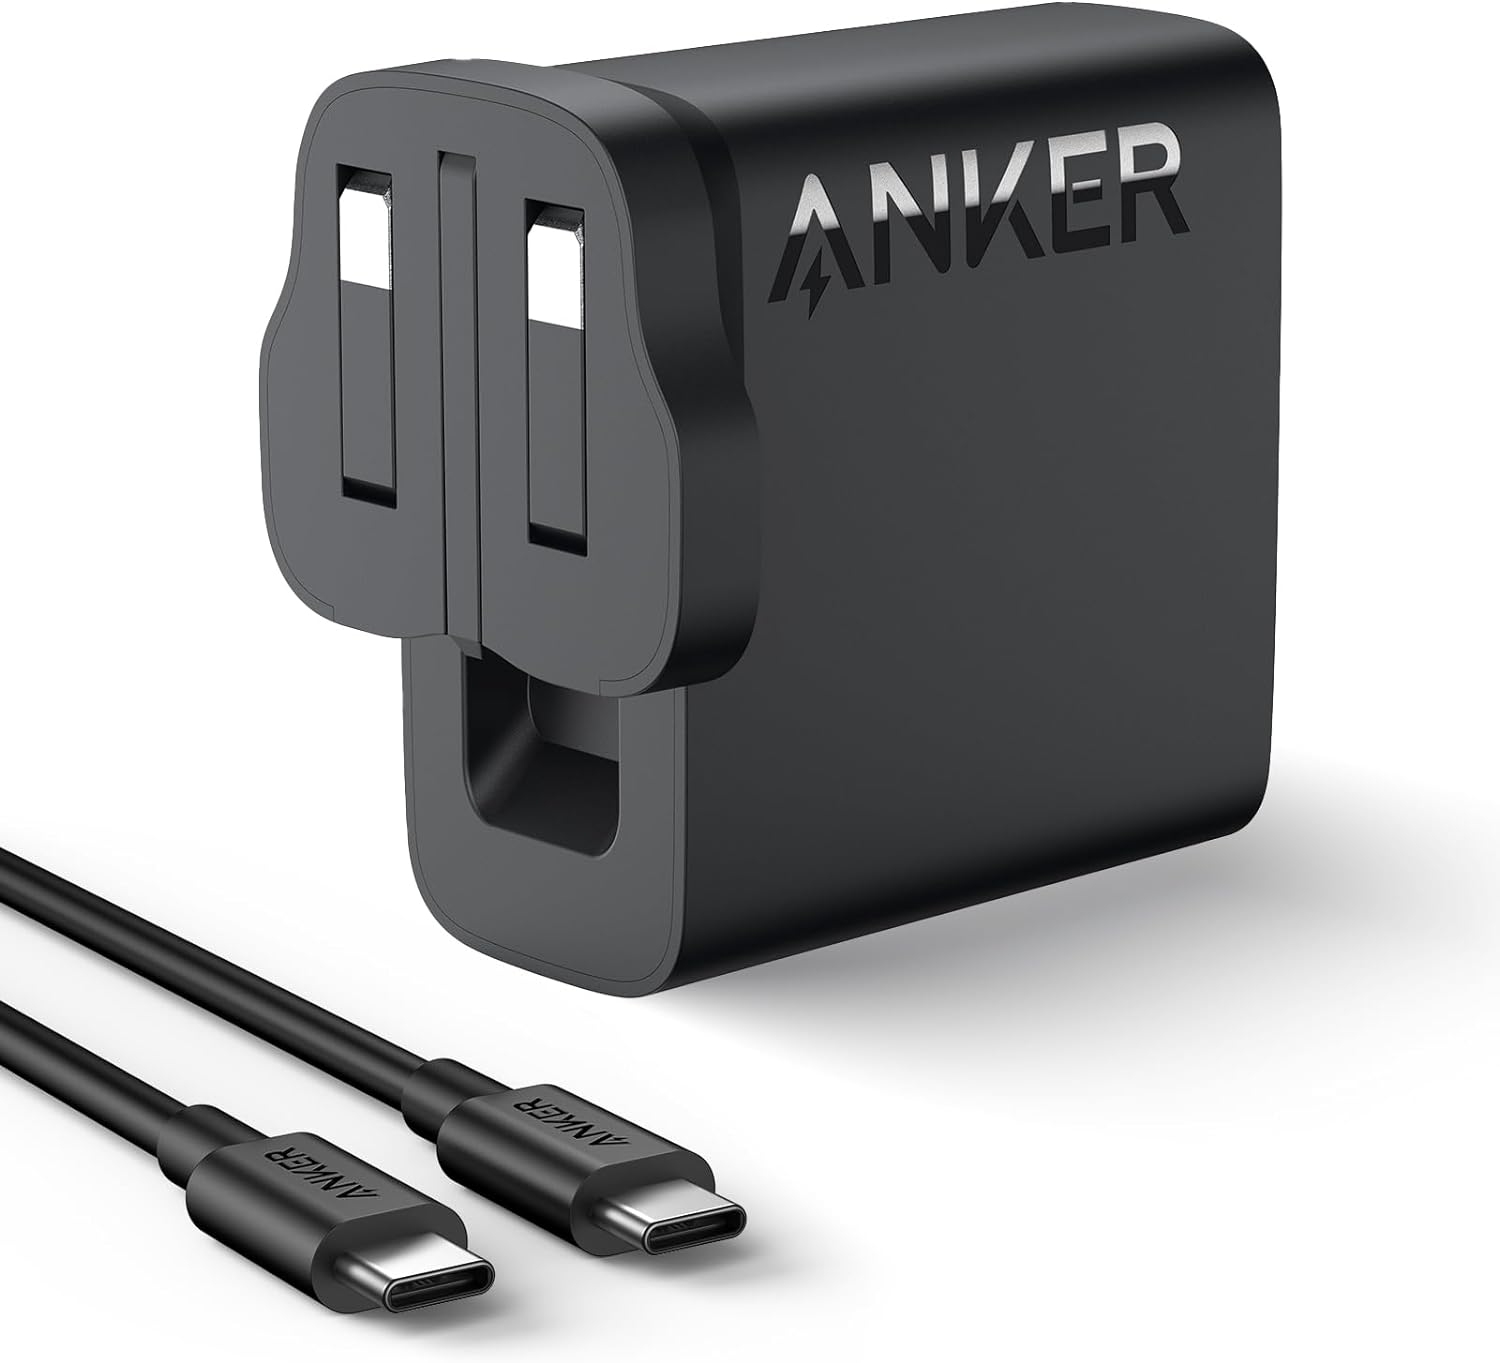 Limited Time Offer - Anker USB C Plug, 100W MacBook Pro Charger, Fast Charger for MacBook, Samsung Galaxy, iPad Pro - Only £29.99